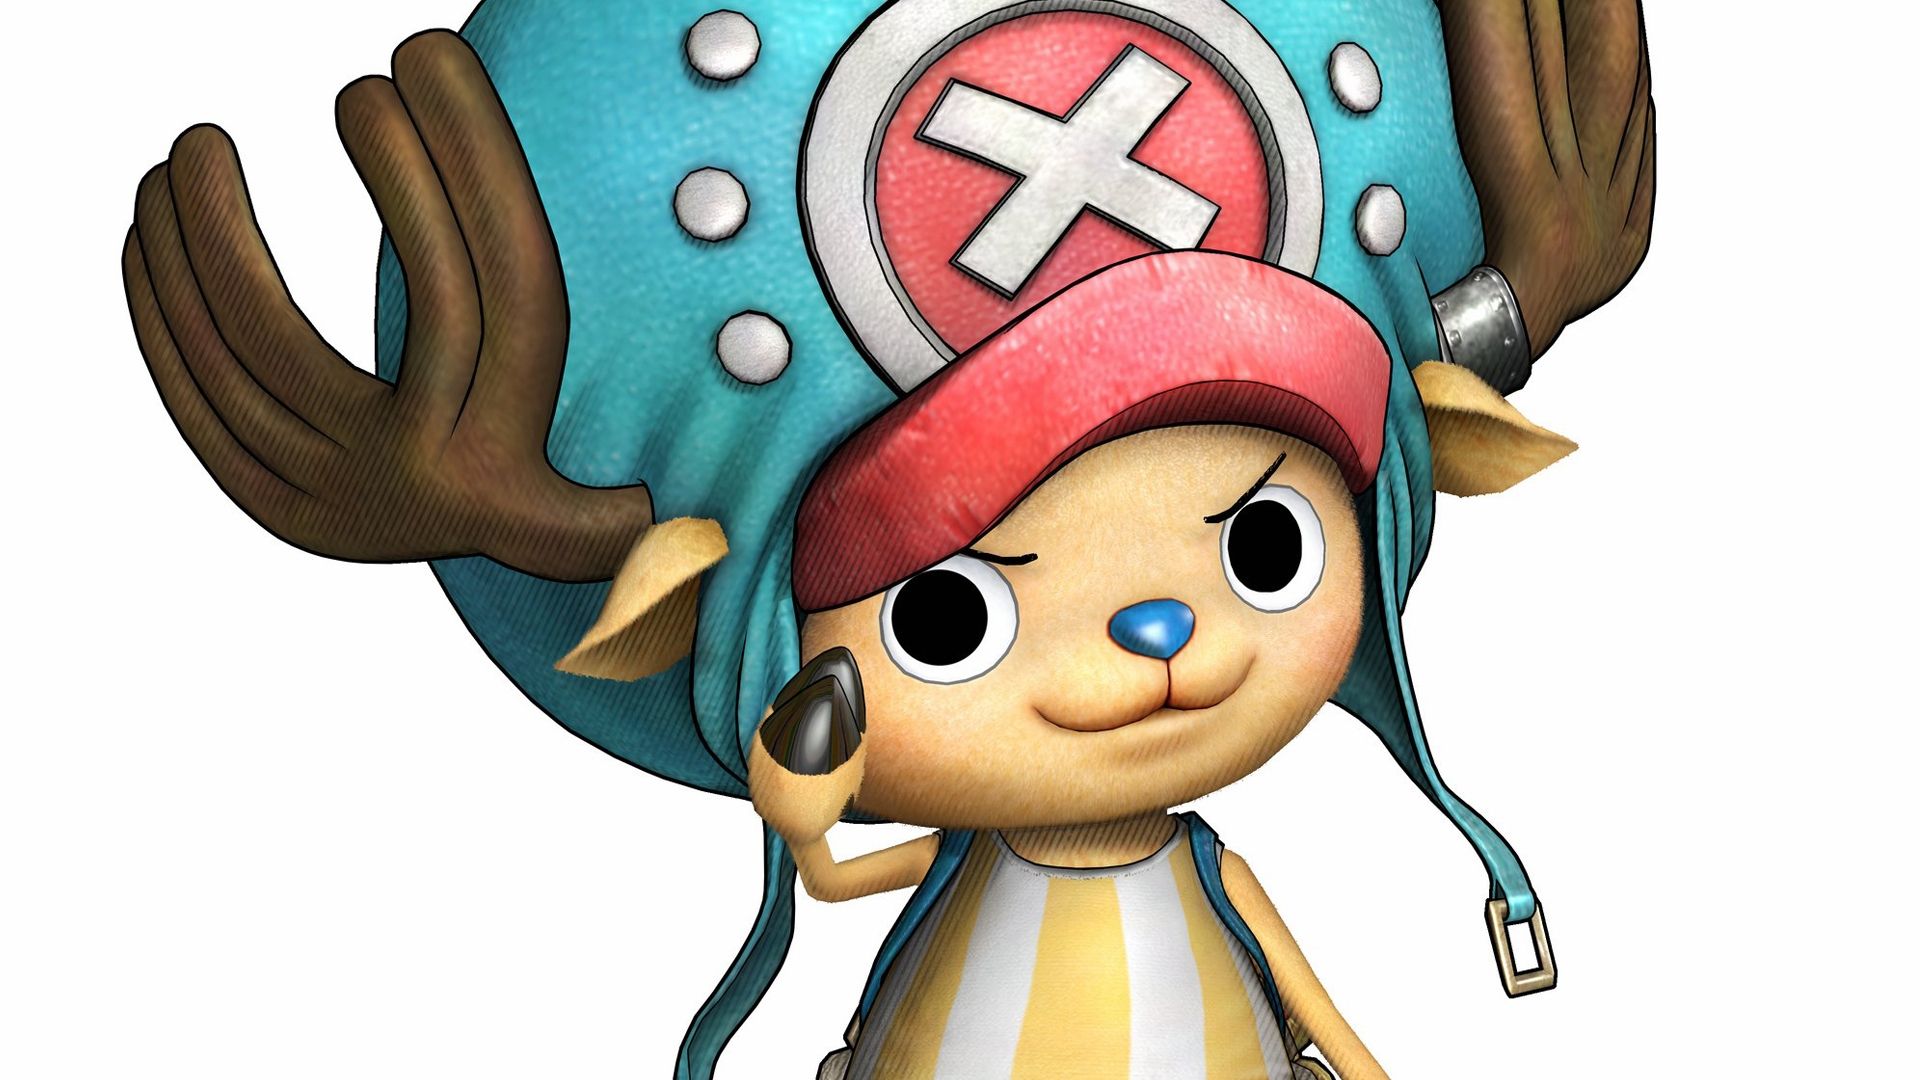 One Piece Chopper Wallpapers HD 10757 - HD Wallpapers Site